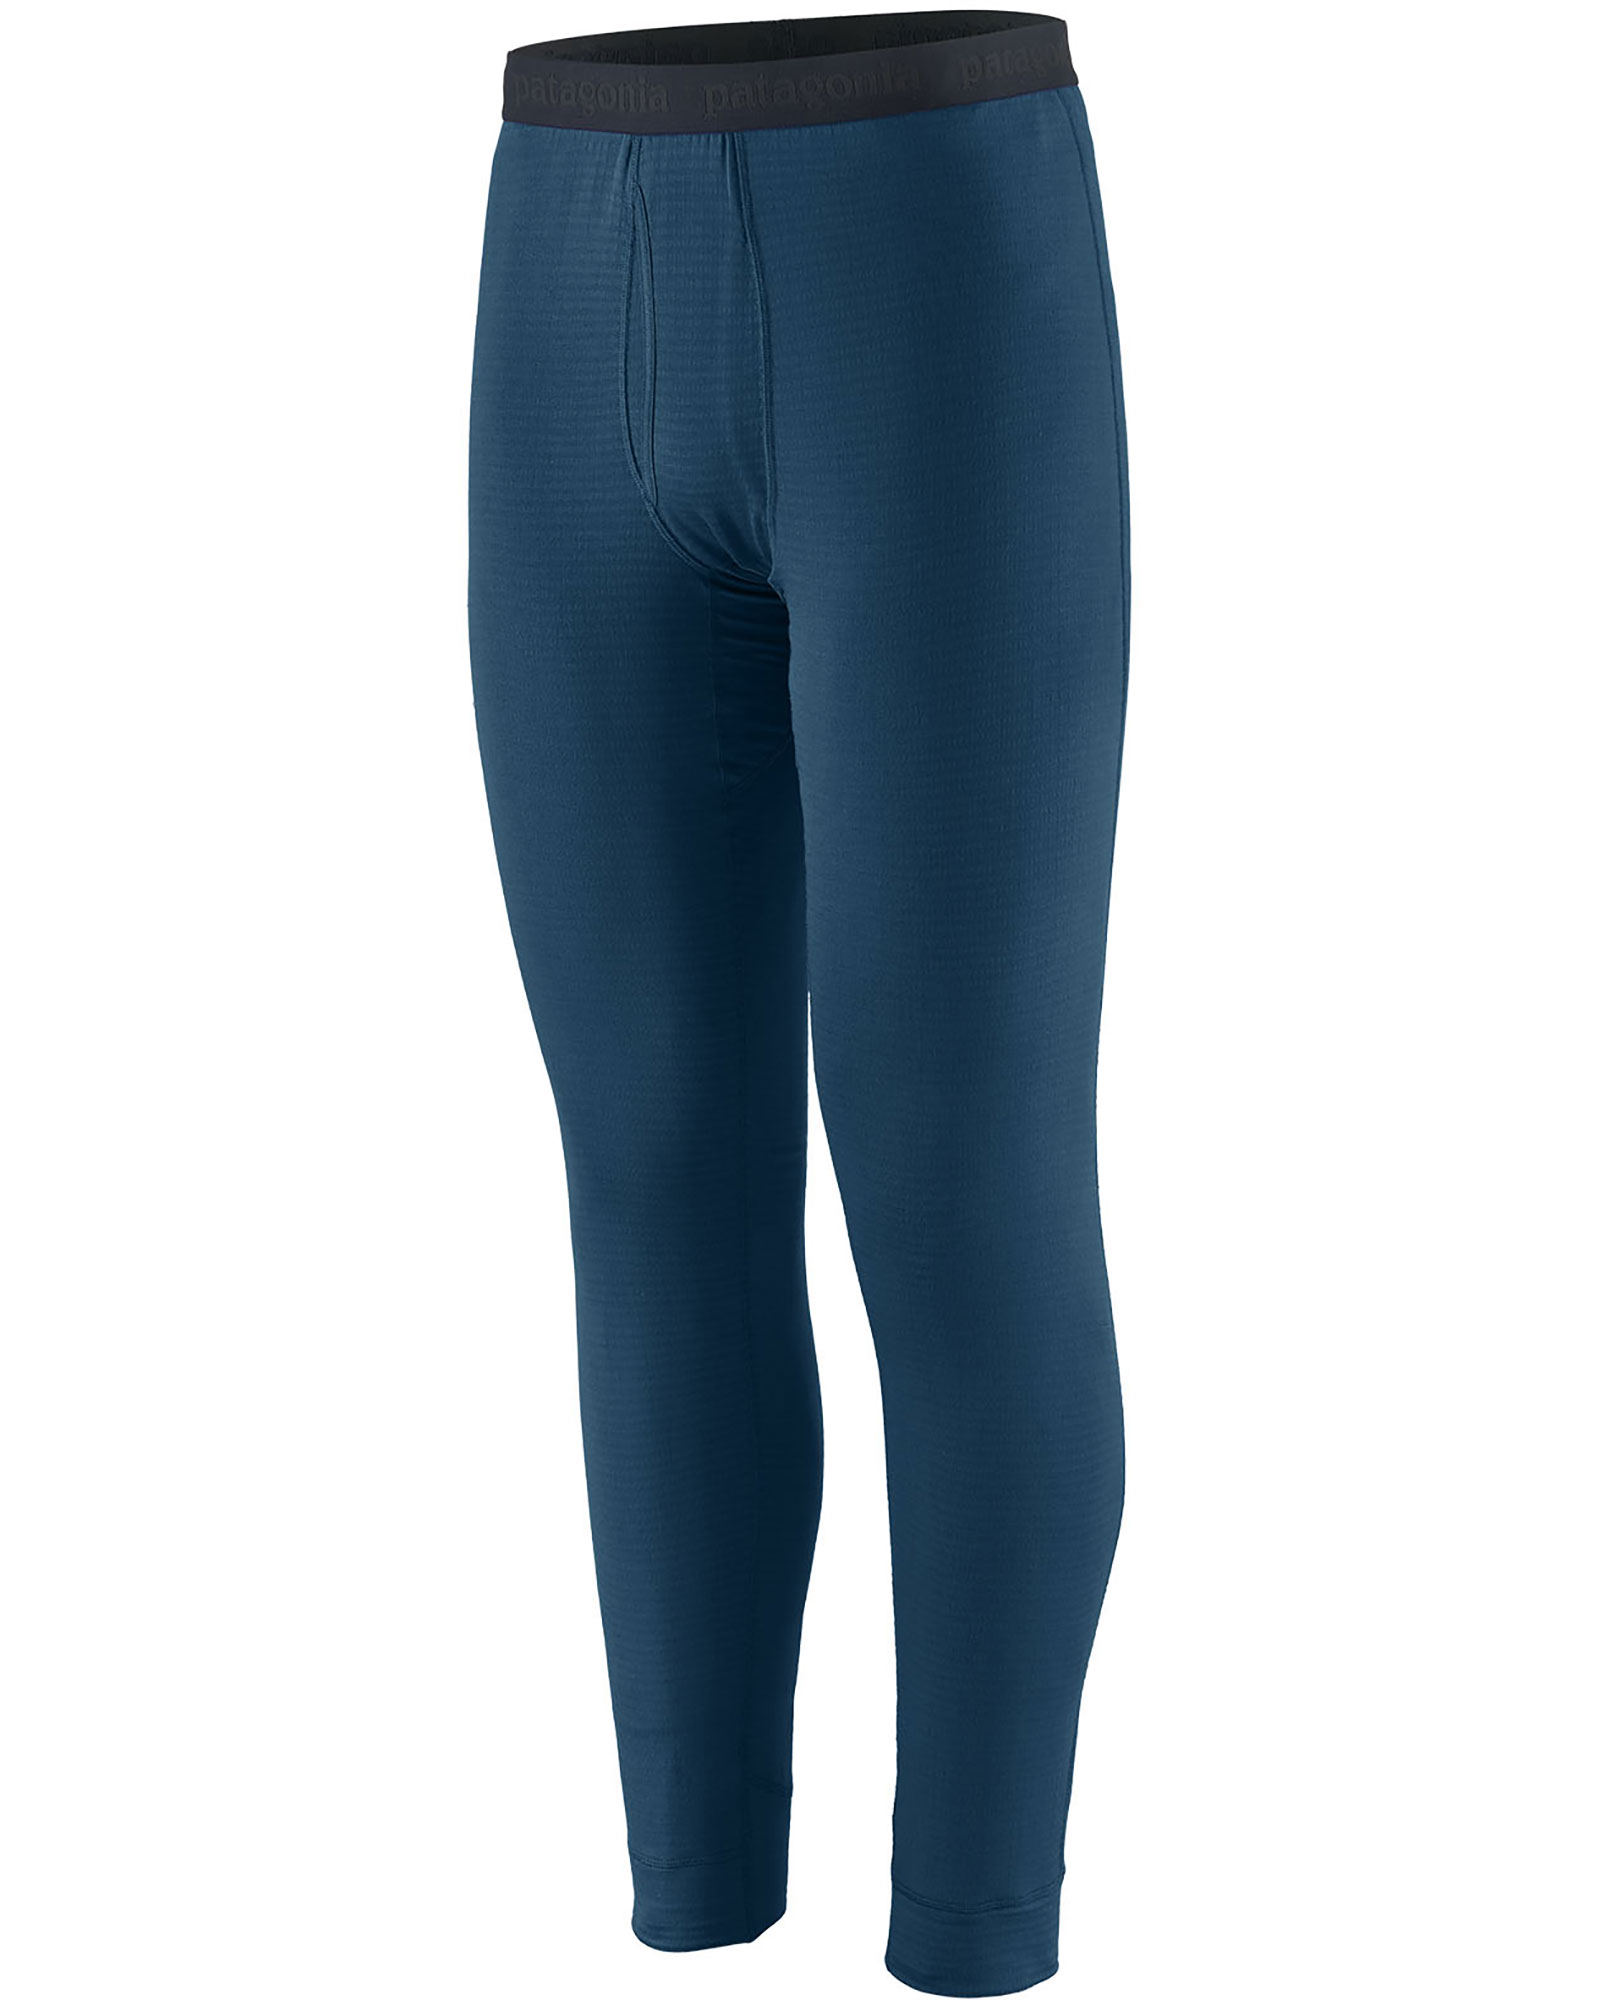 Patagonia Capilene Men’s Thermal Weight Tights - Lagoon Blue XL